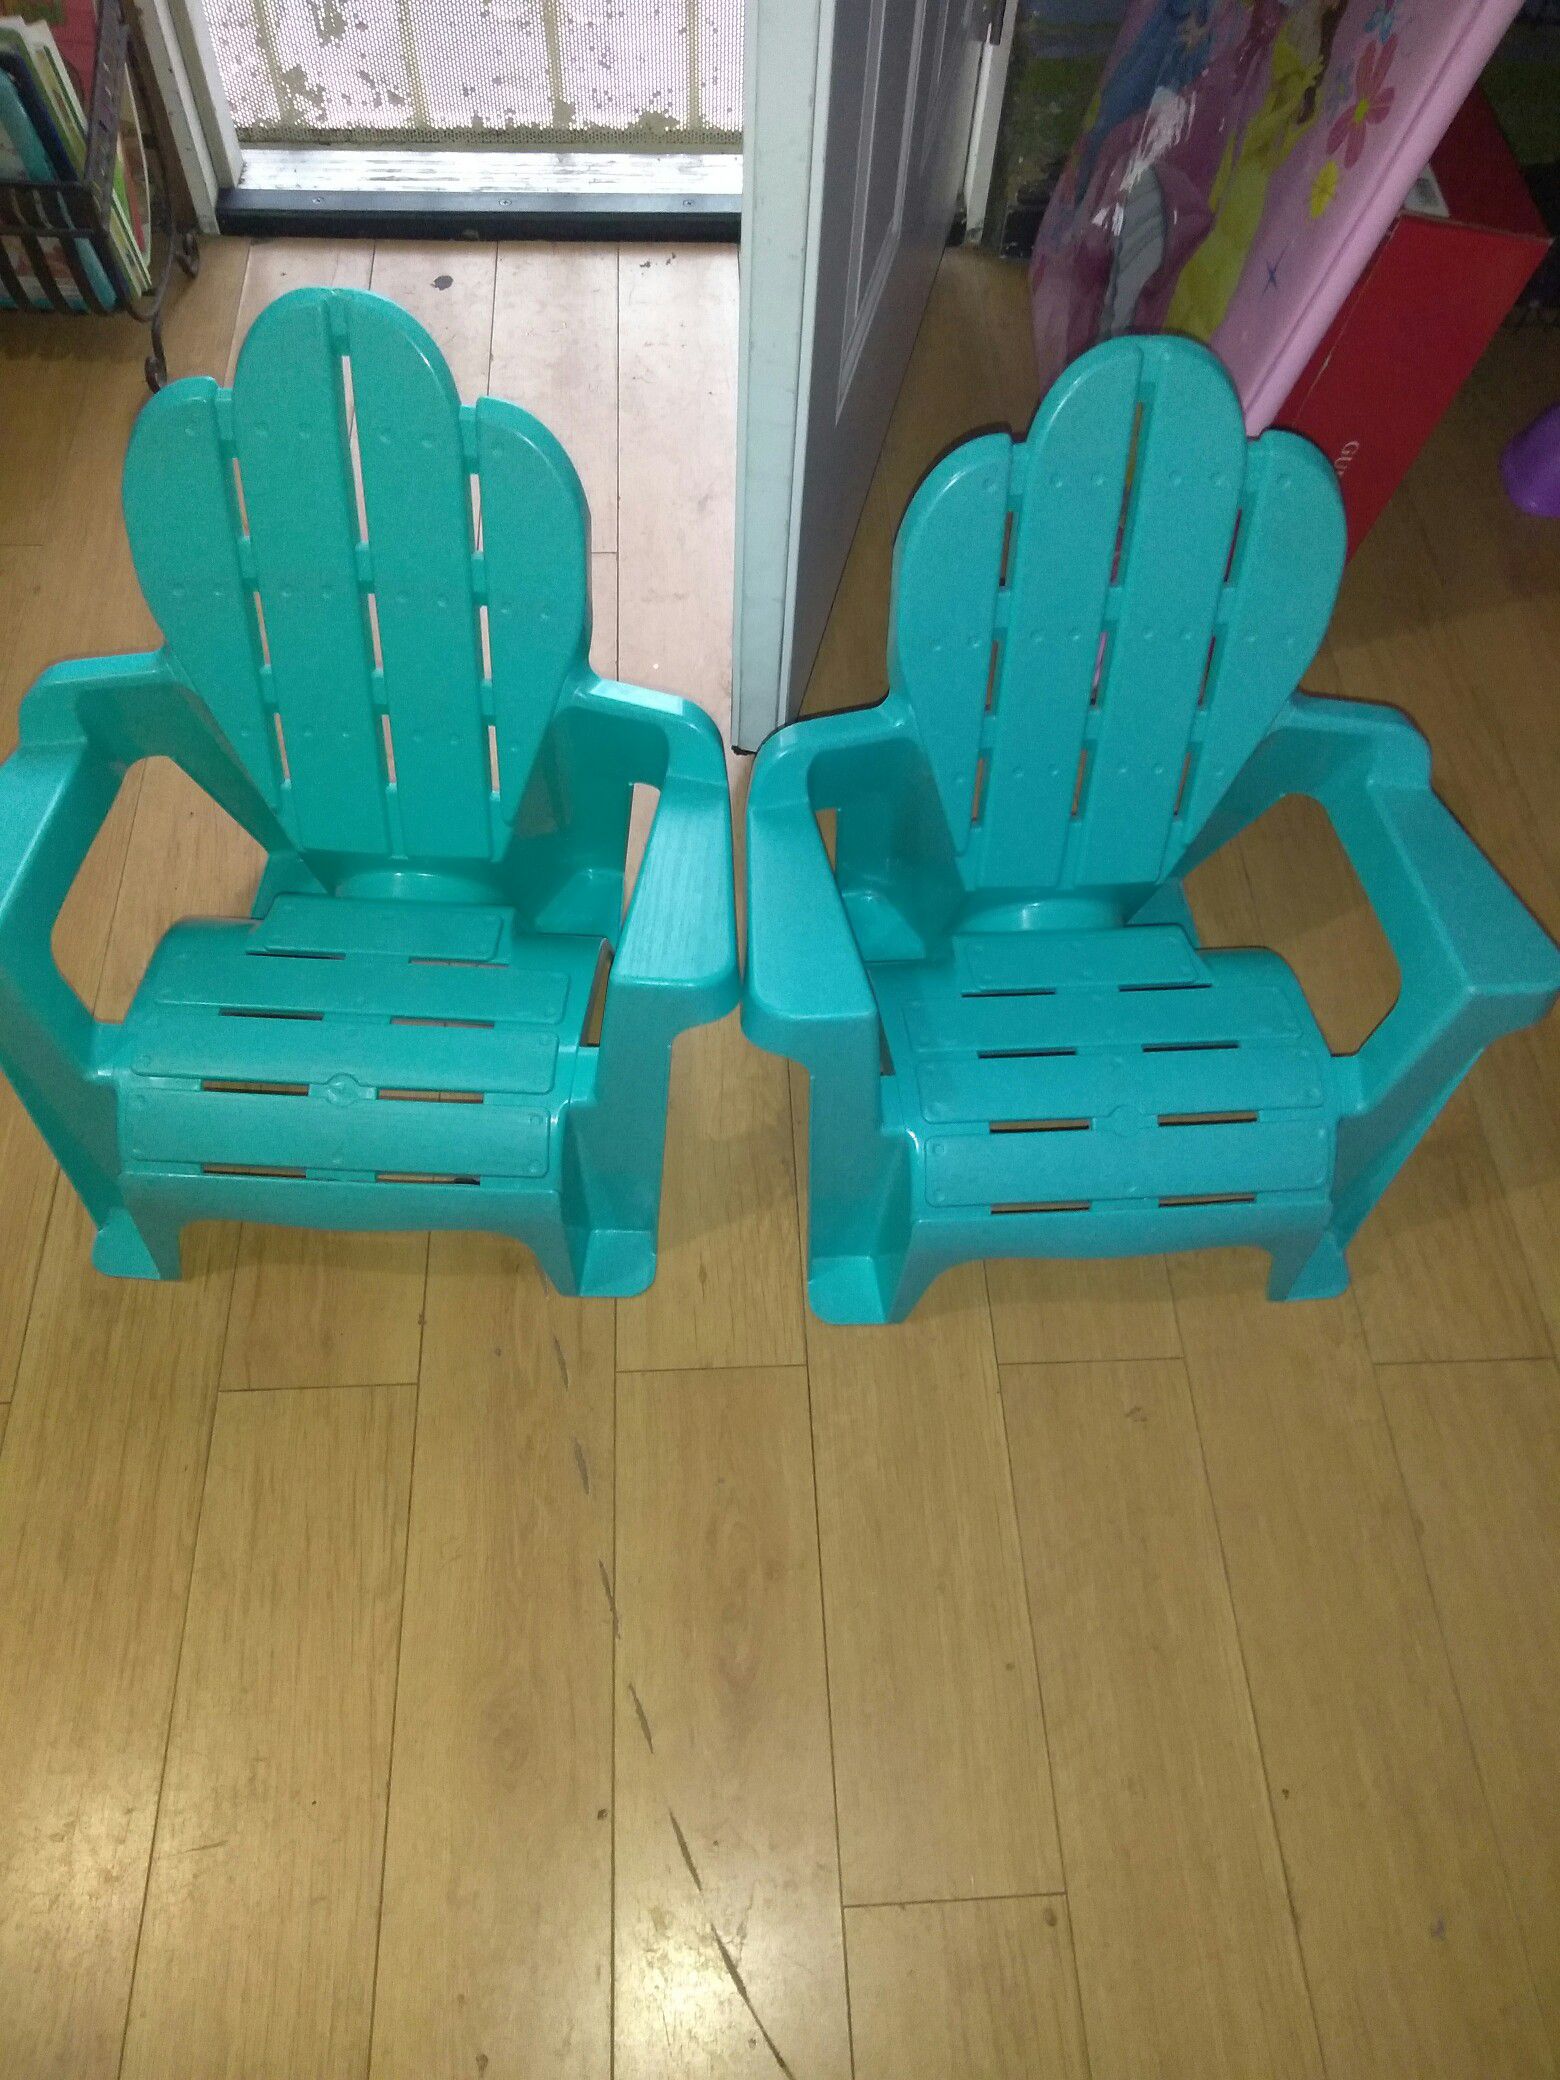 2 small Kids chairs